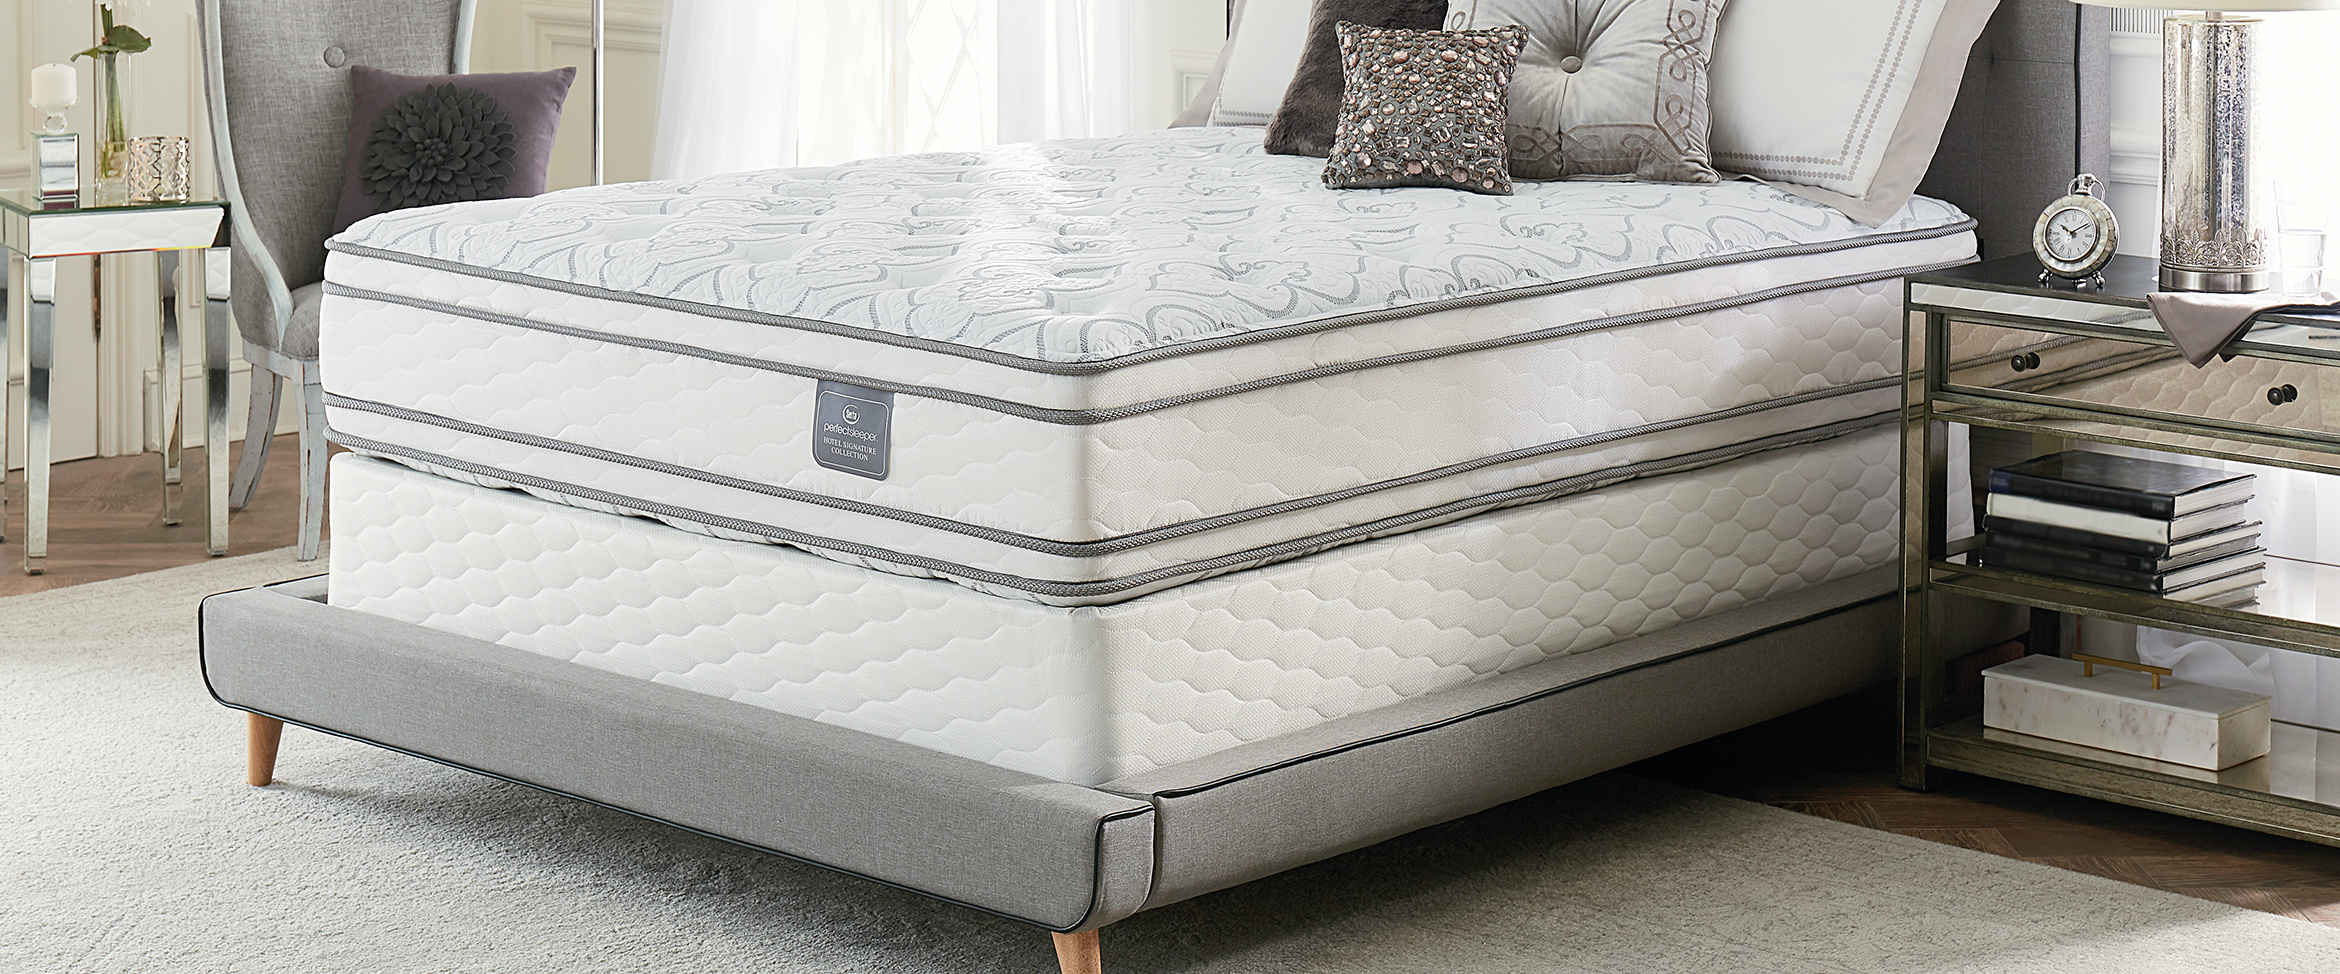 serta outlet double sided mattress